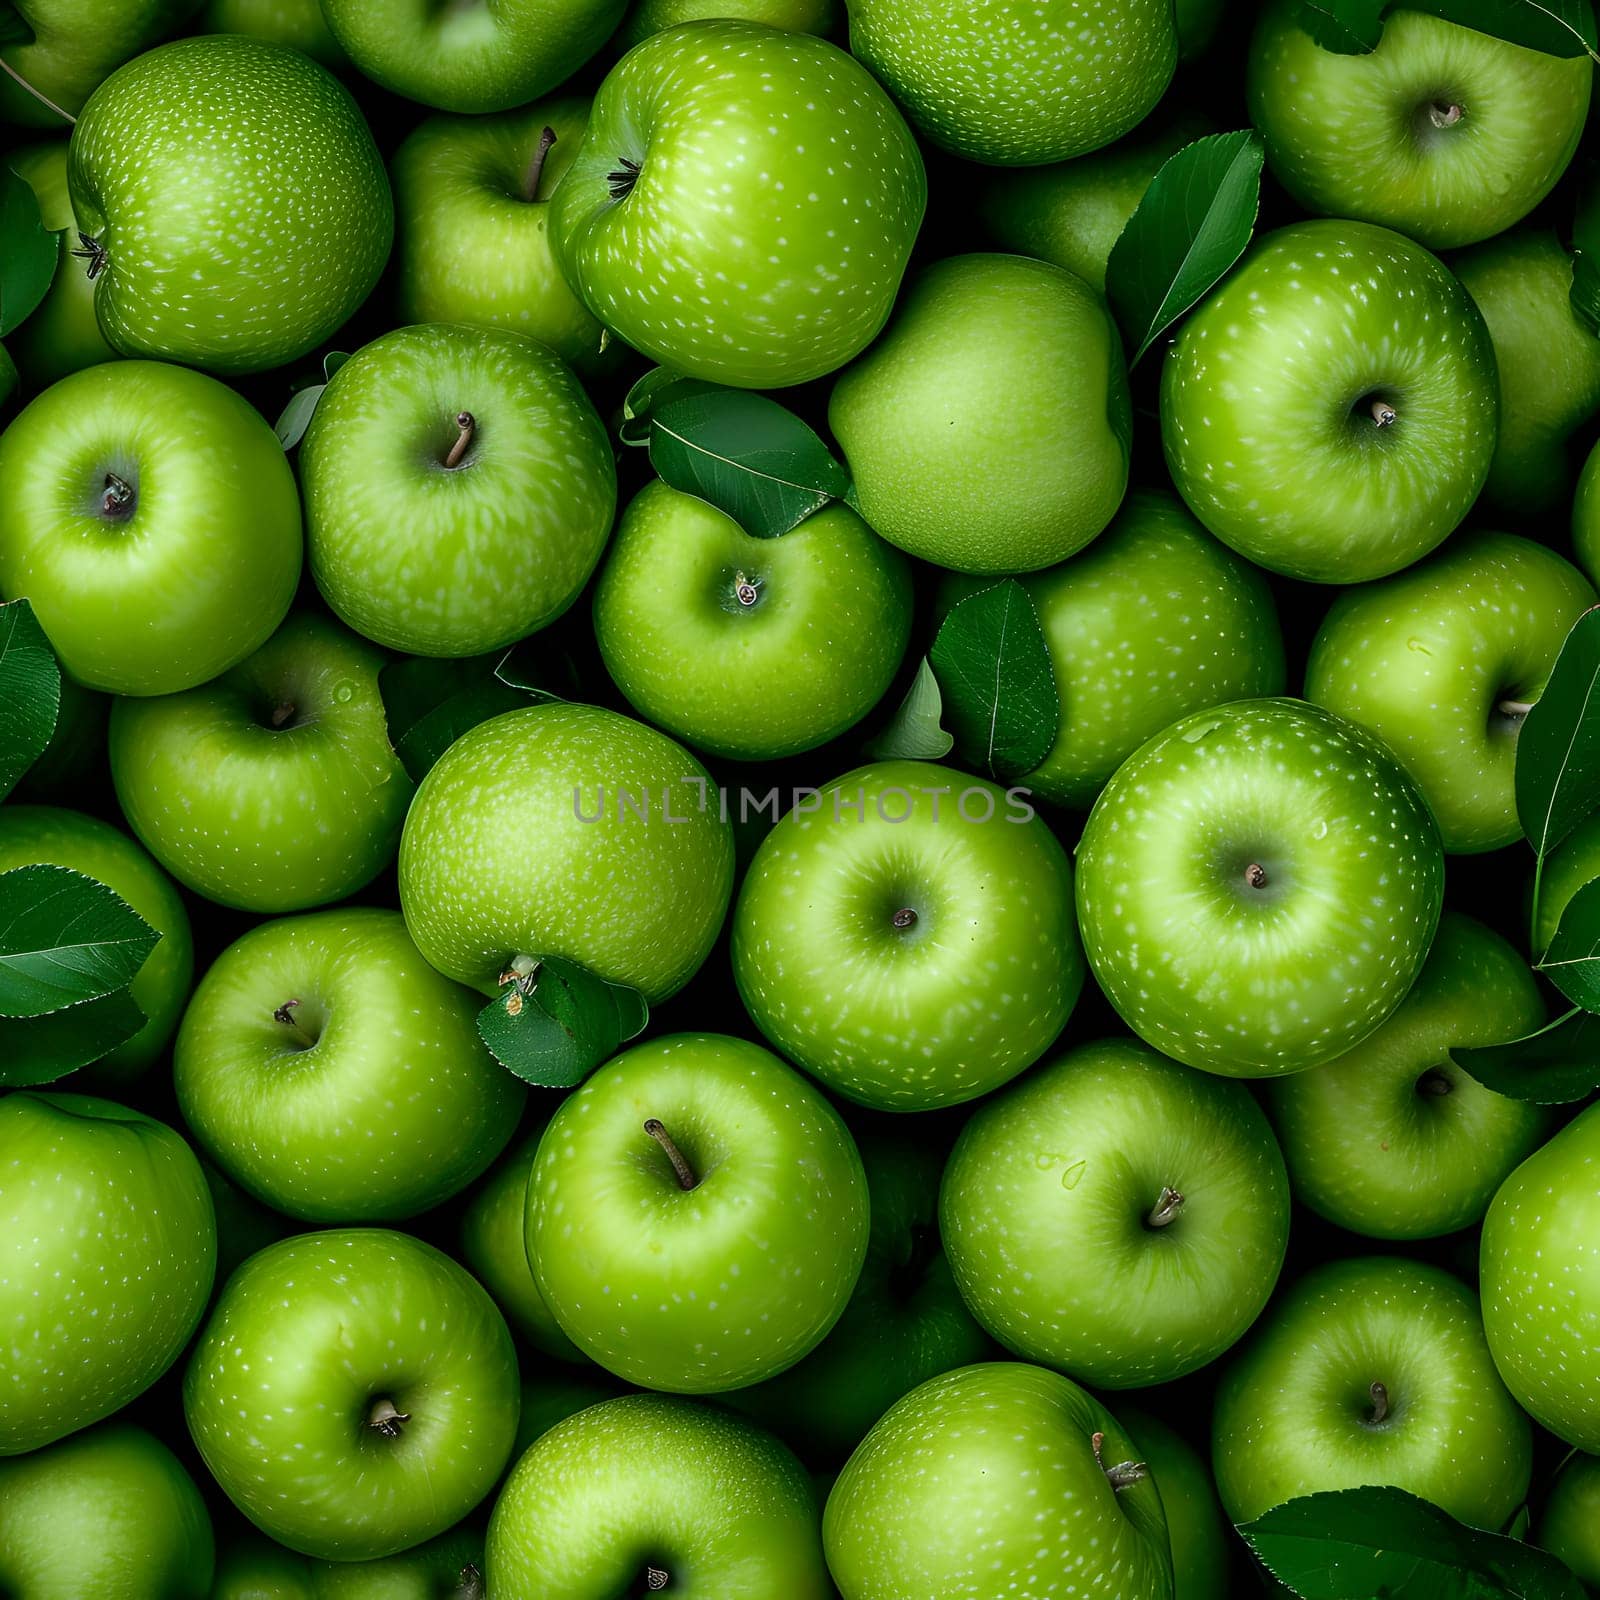 Seamless texture and background of green apples pile with high angle view. Neural network generated image. Not based on any actual scene or pattern.